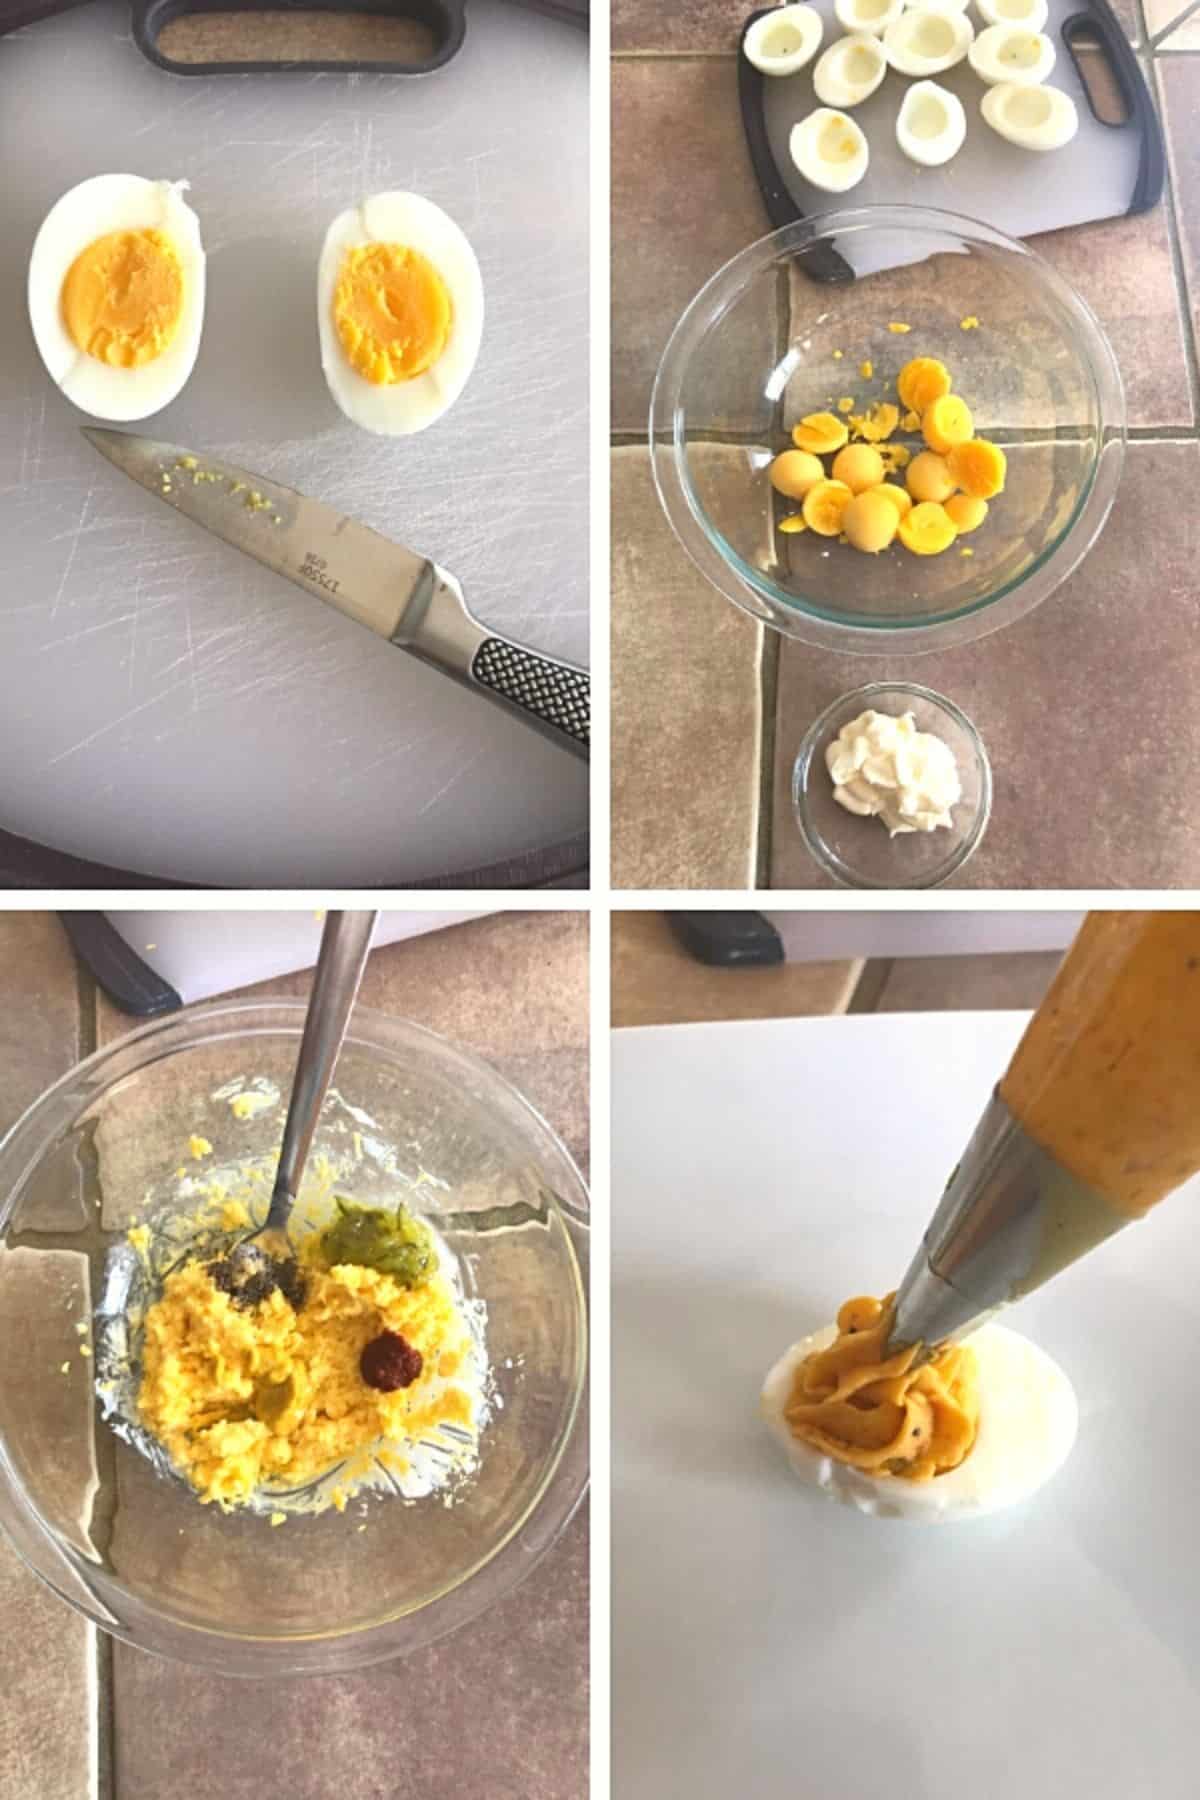 A step by step collage showing how to make deviled eggs.